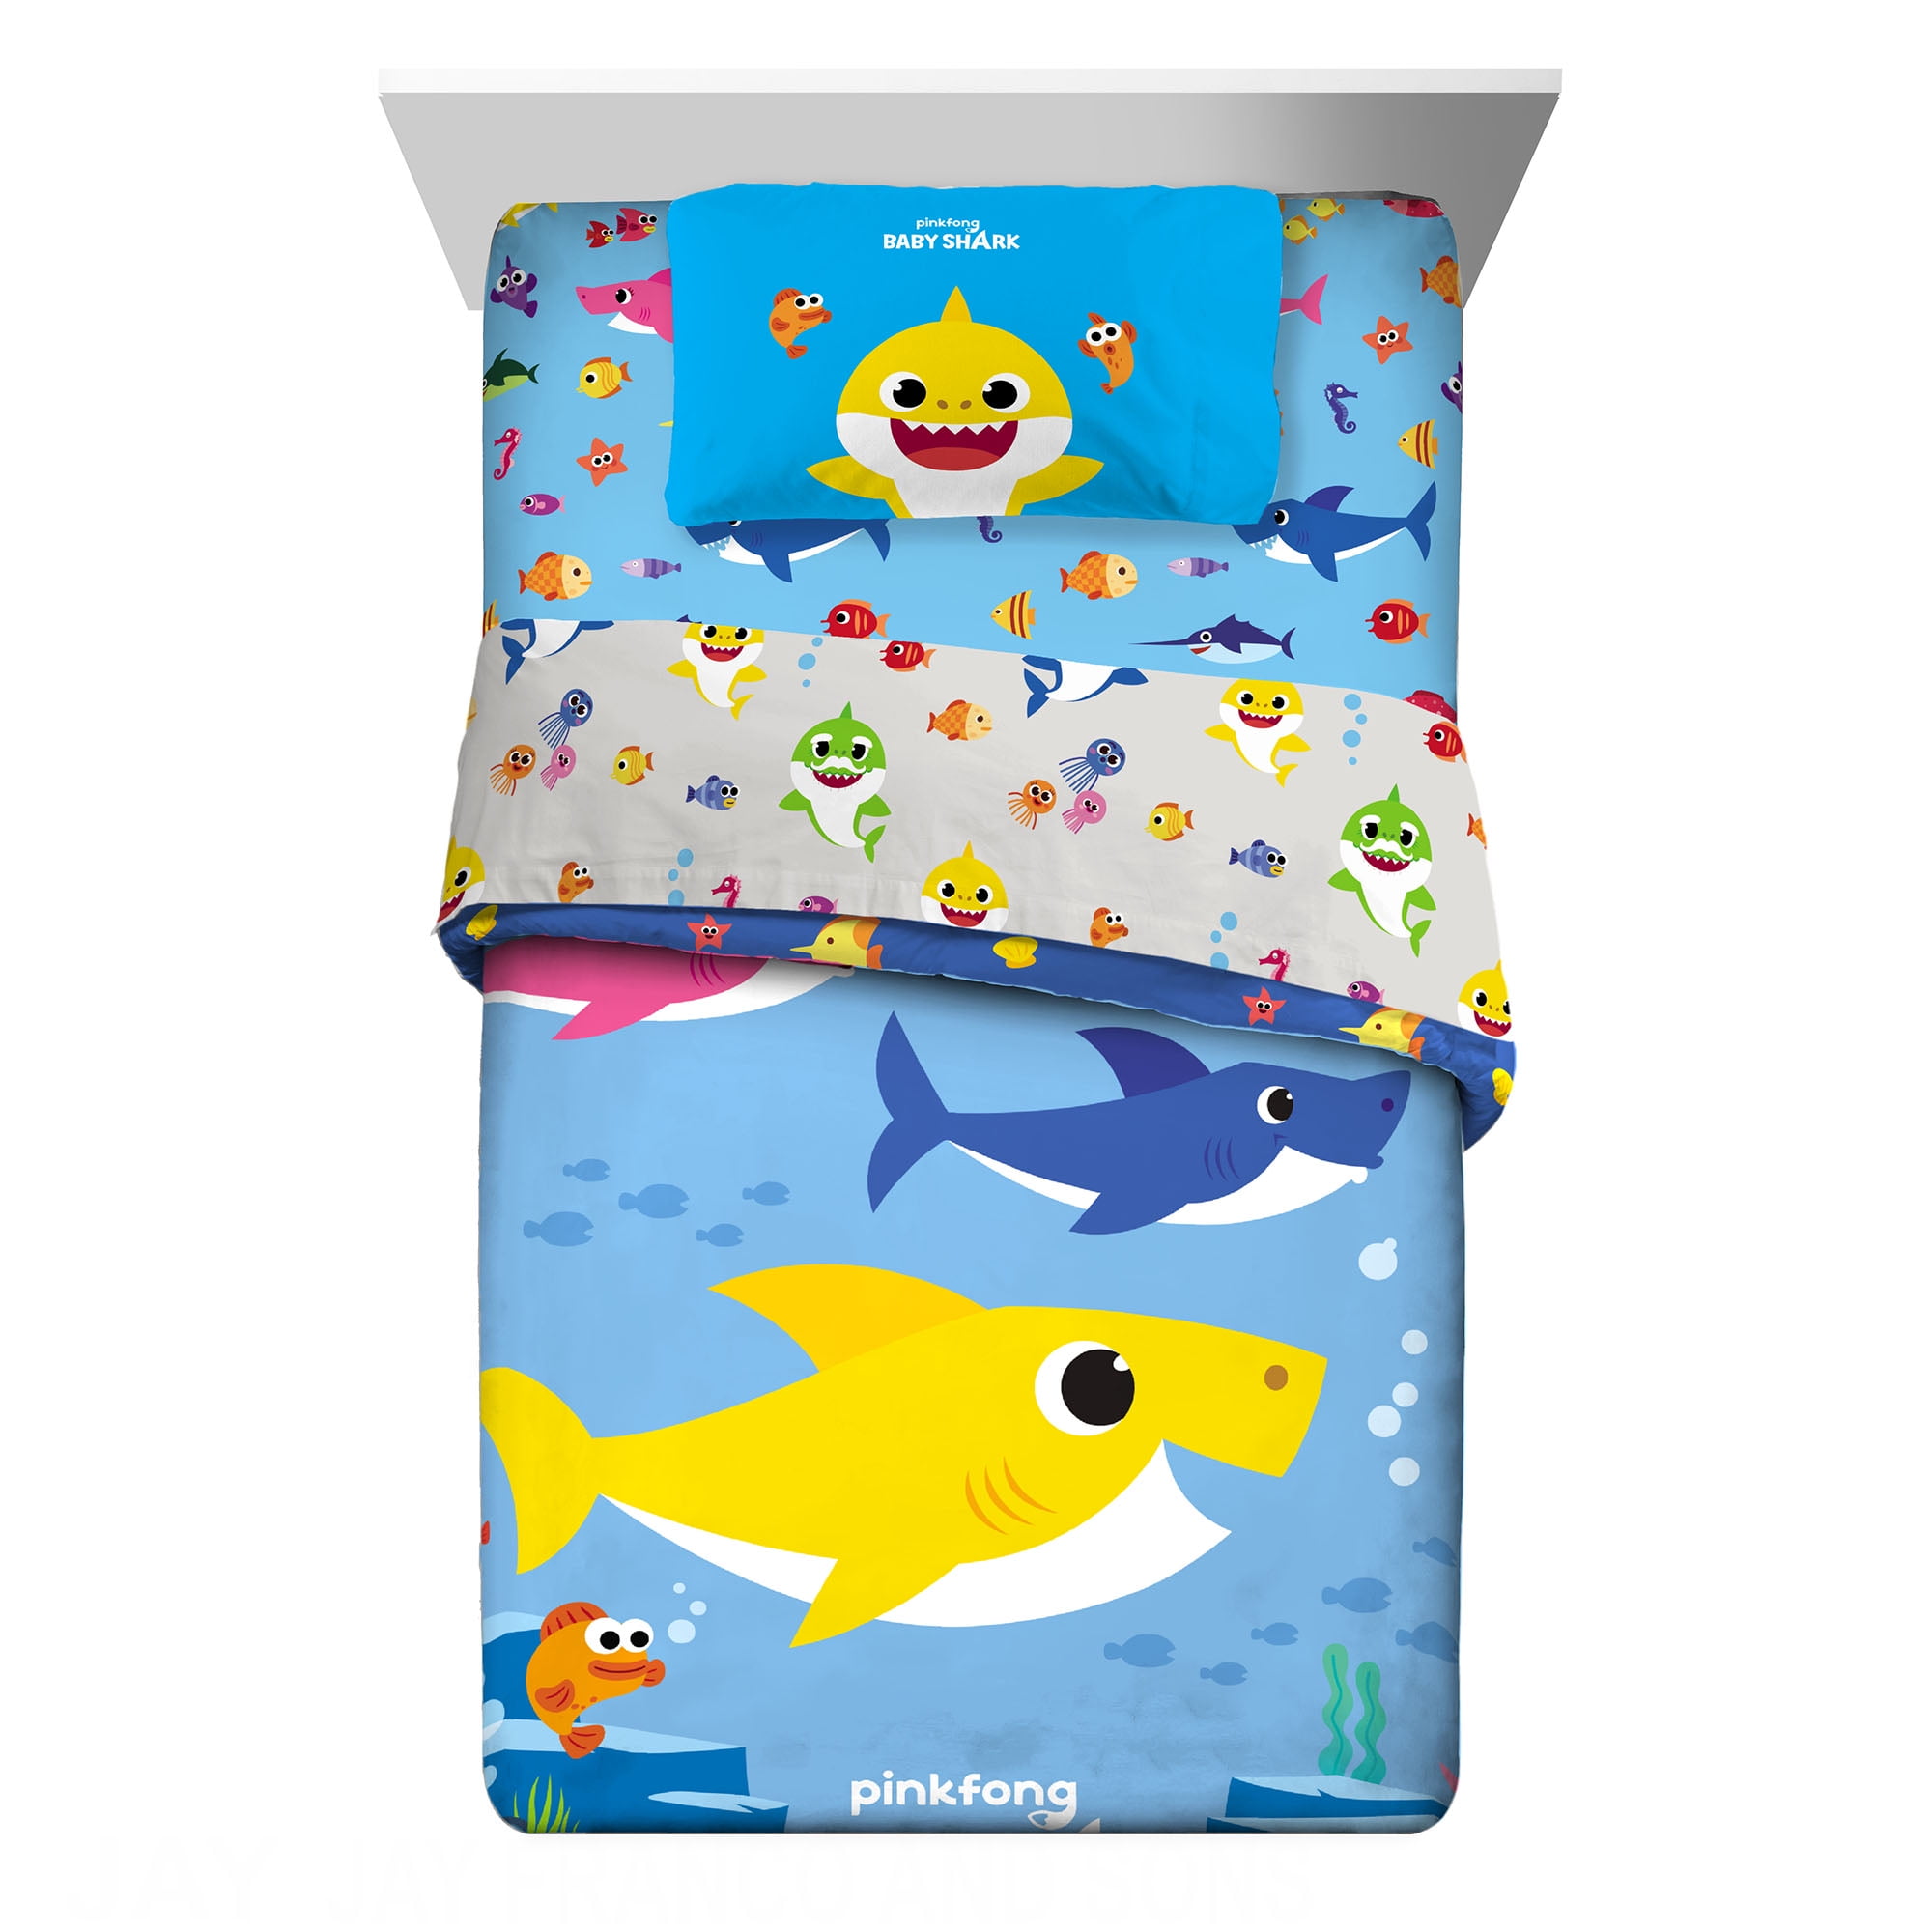 Official Pinkfong Baby Shark Fishes Shaped Cushion Matches Bedding 